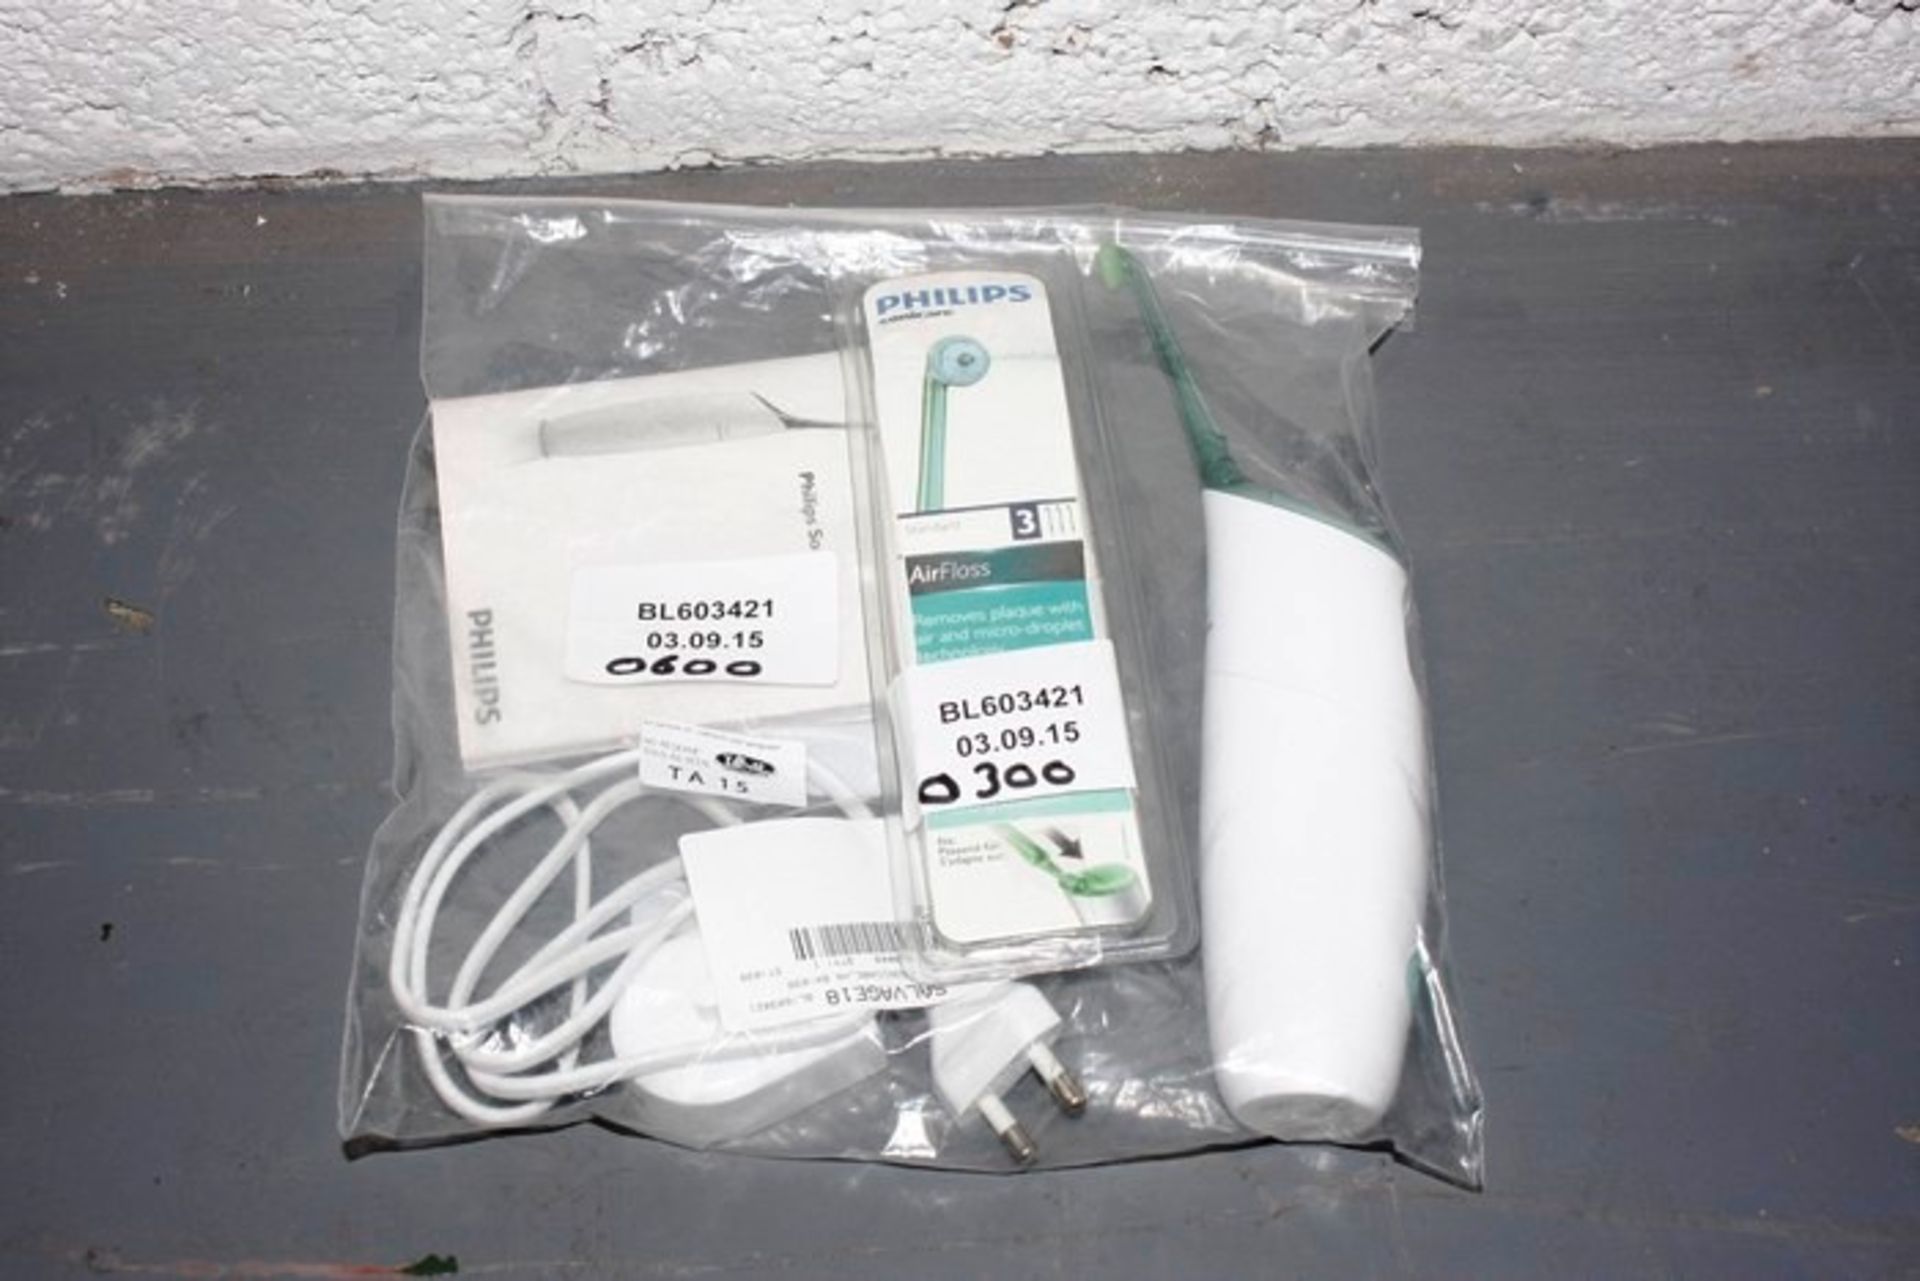 PHILIPS SONICARE AIRFLOSS SYSTEM RRP: £90.00 BL603421, 03/09/15